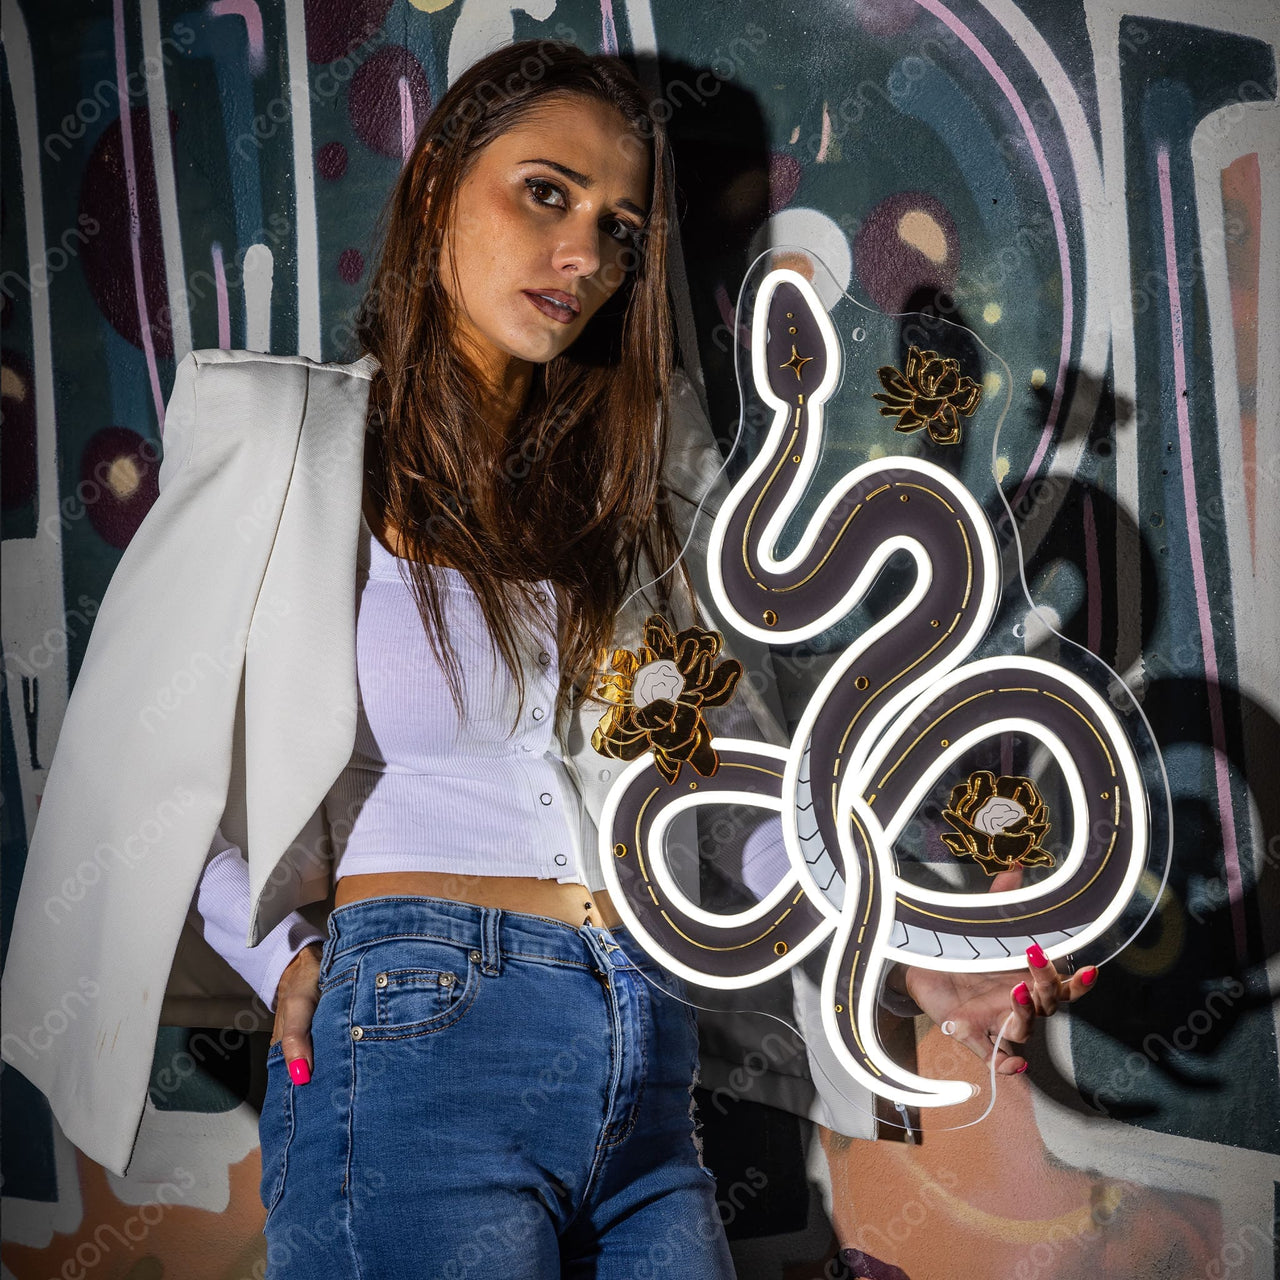 "Floral Serpent" LED Neon x Print x Reflective Acrylic by Neon Icons